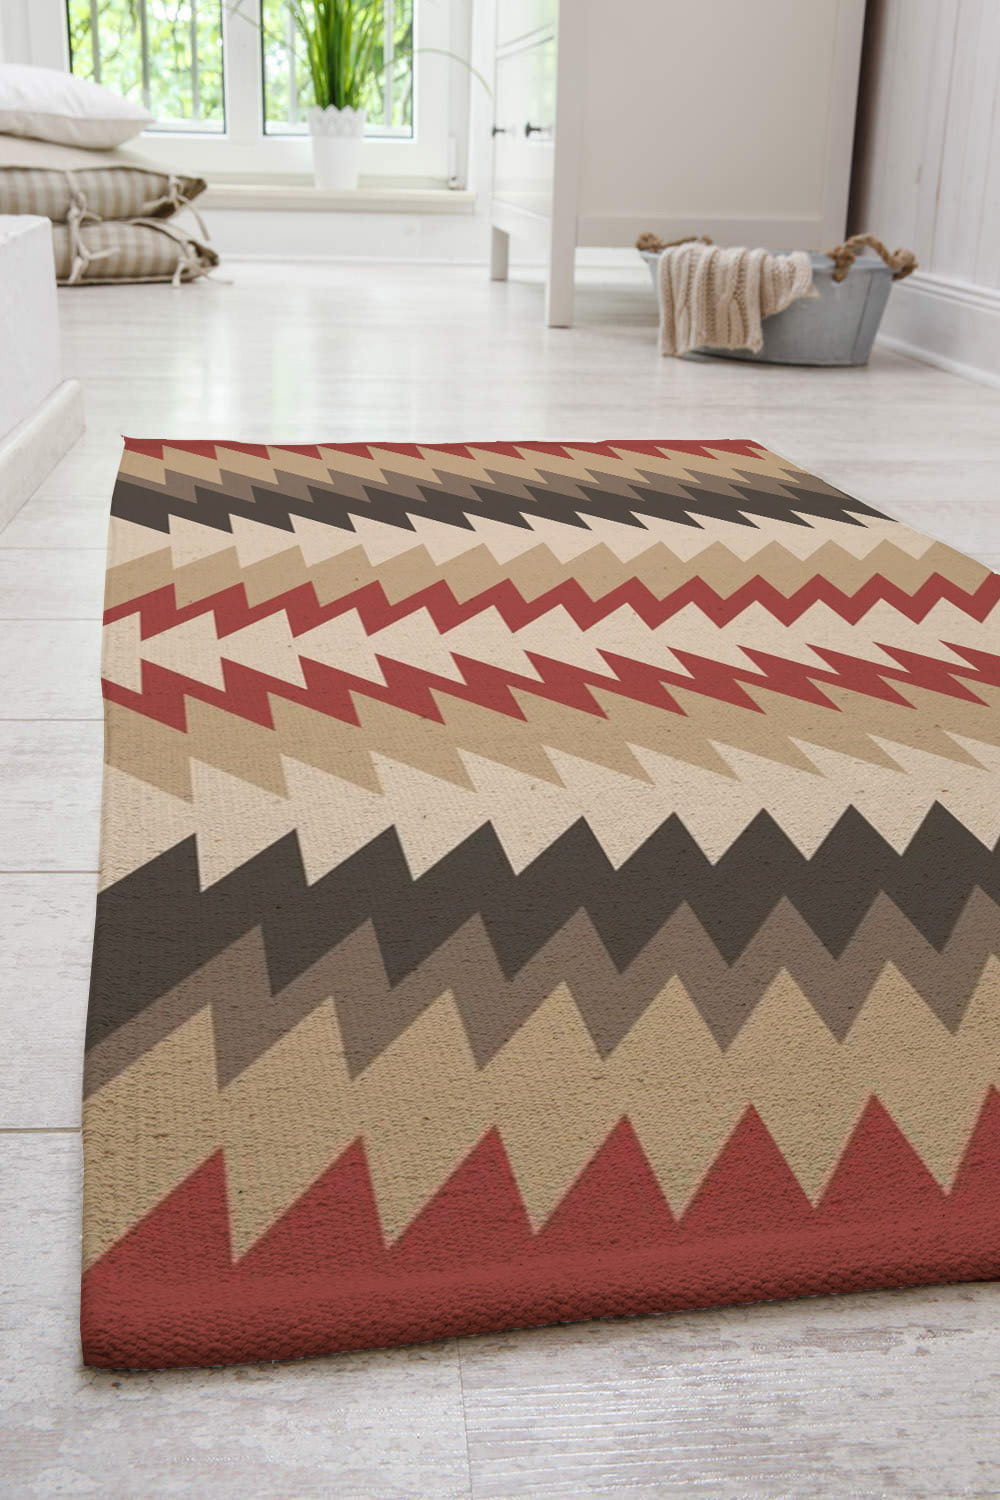 printed cotton carpet, installed in your home space, red, black and beige prints on carpet, outdoor rugs for decks